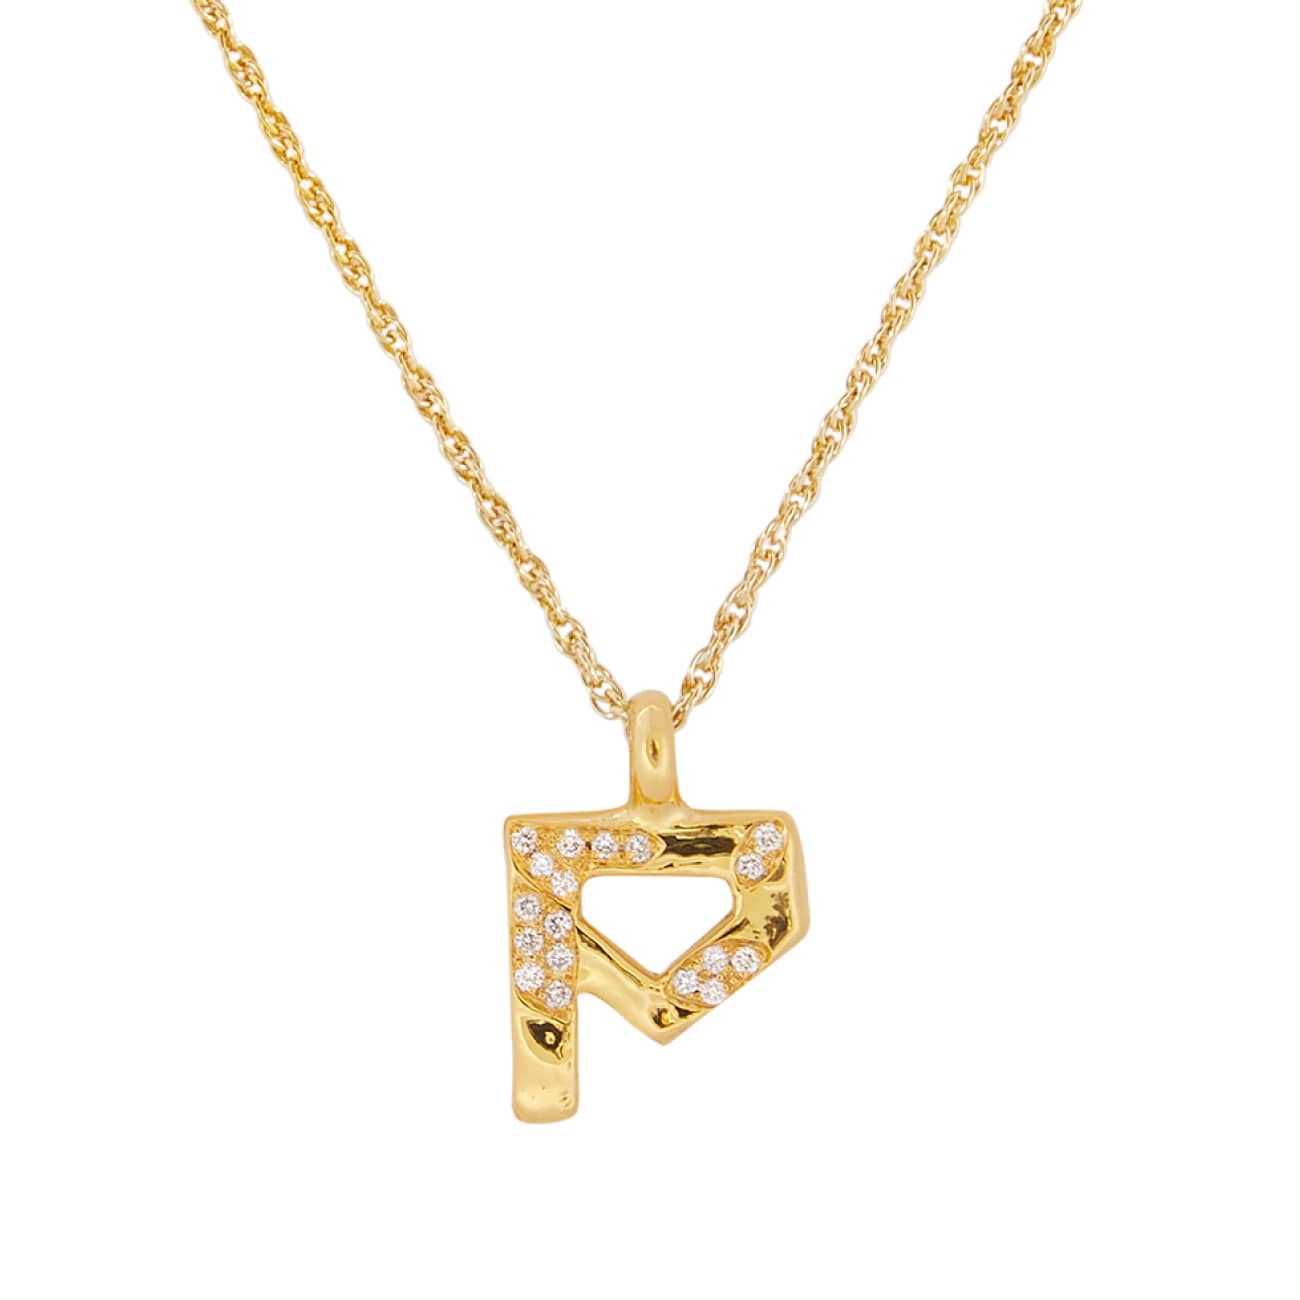 Add These Letter Jewels to Your Daily Wardrobe